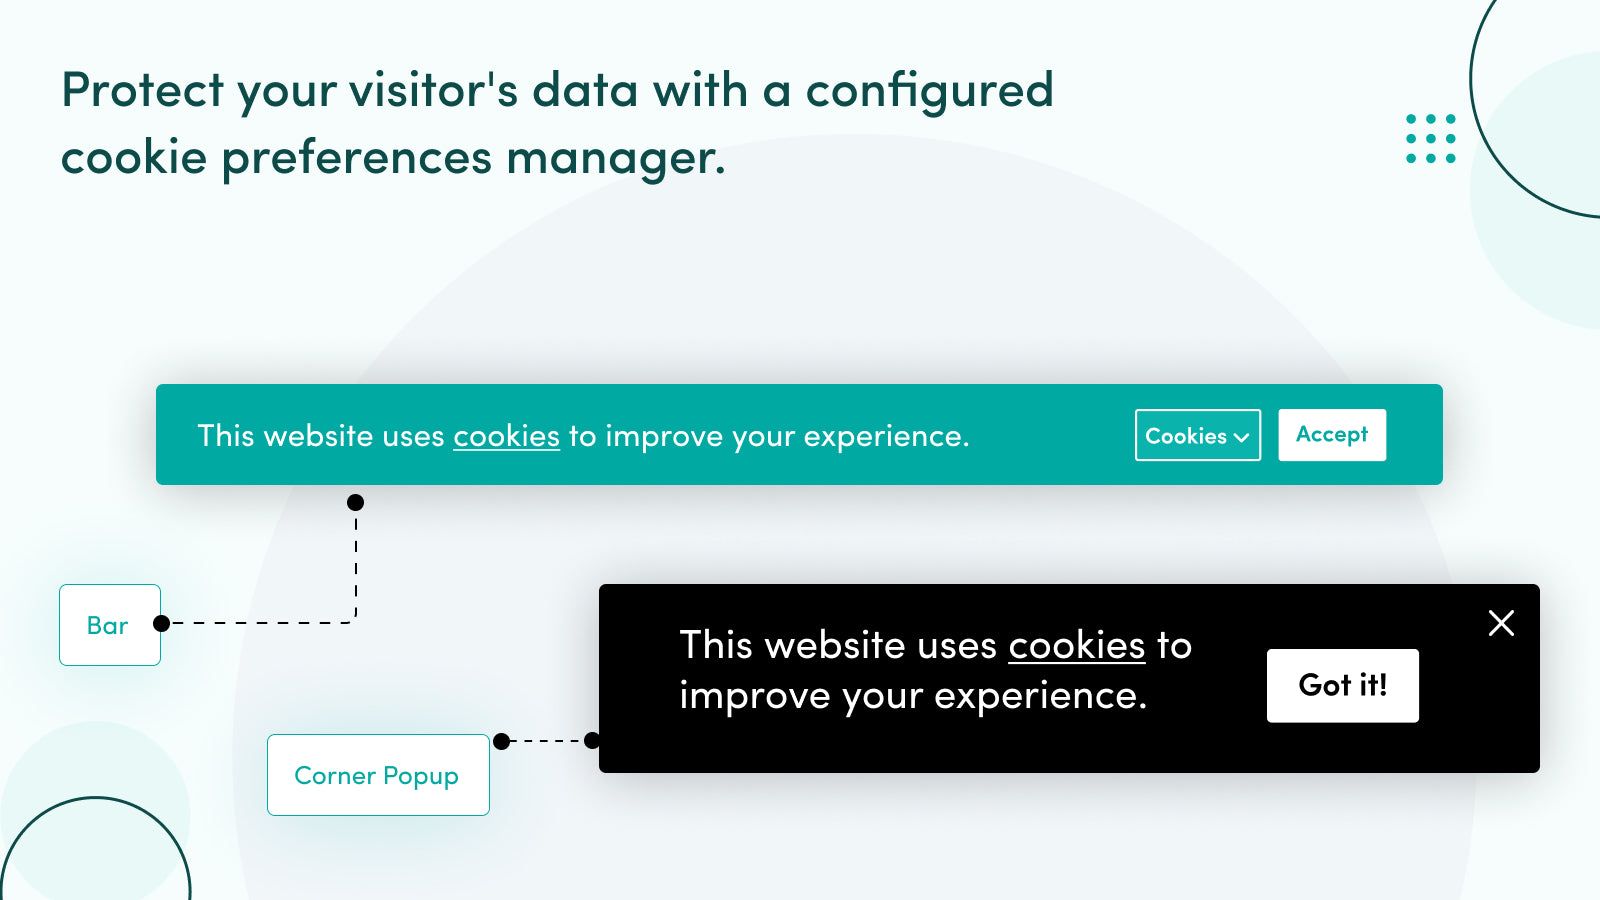 Utilize our configured cookie preferences manager.